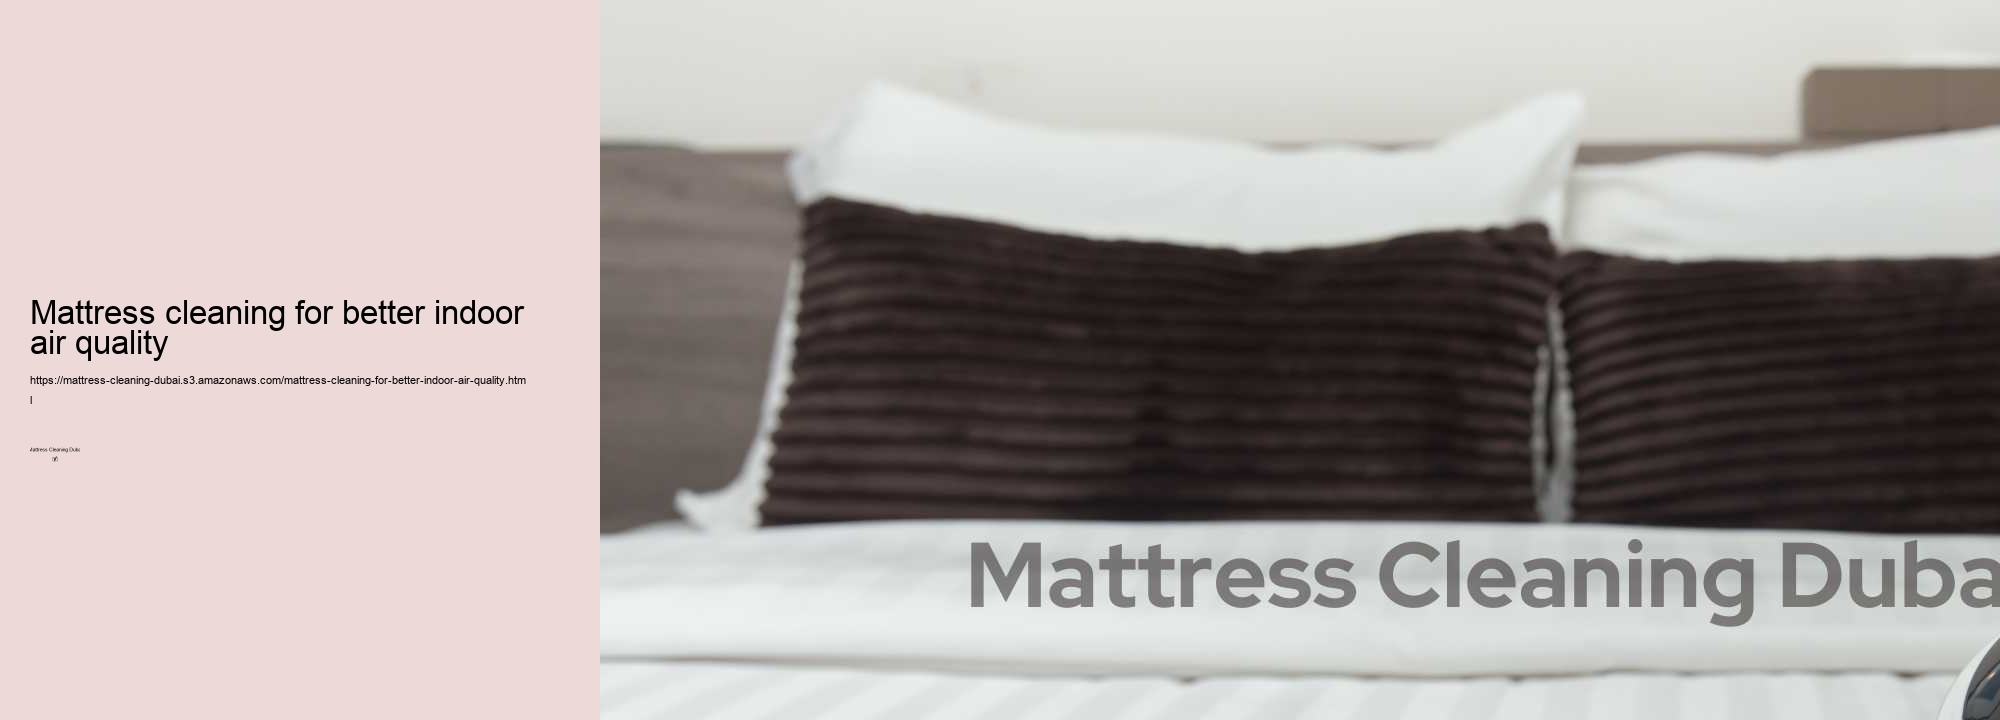 Mattress cleaning for better indoor air quality